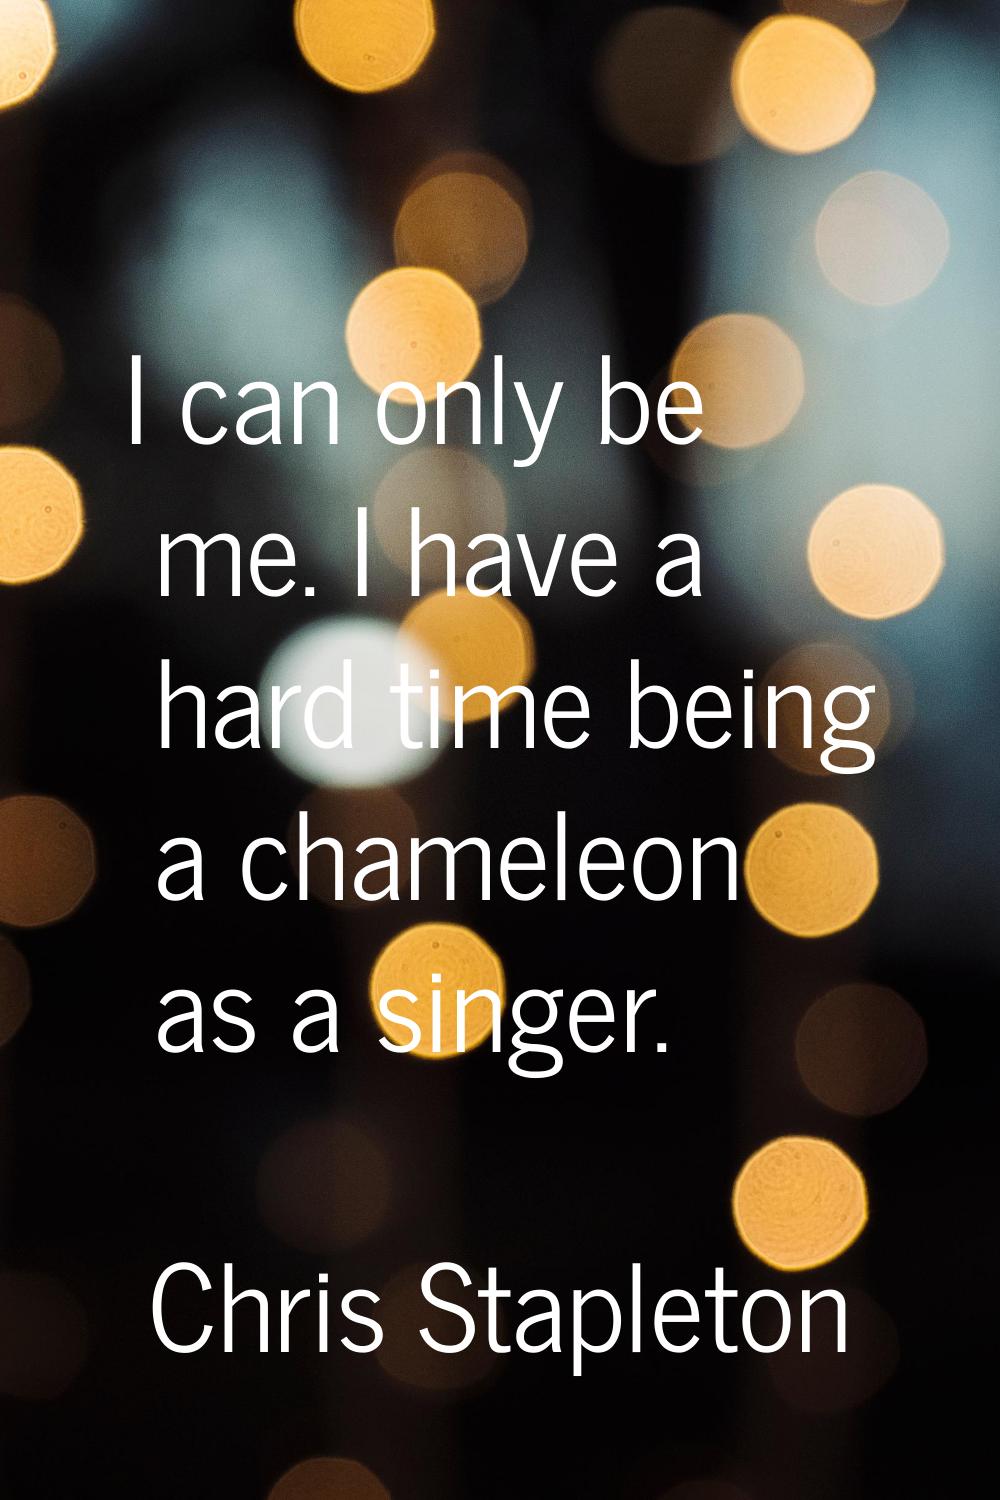 I can only be me. I have a hard time being a chameleon as a singer.